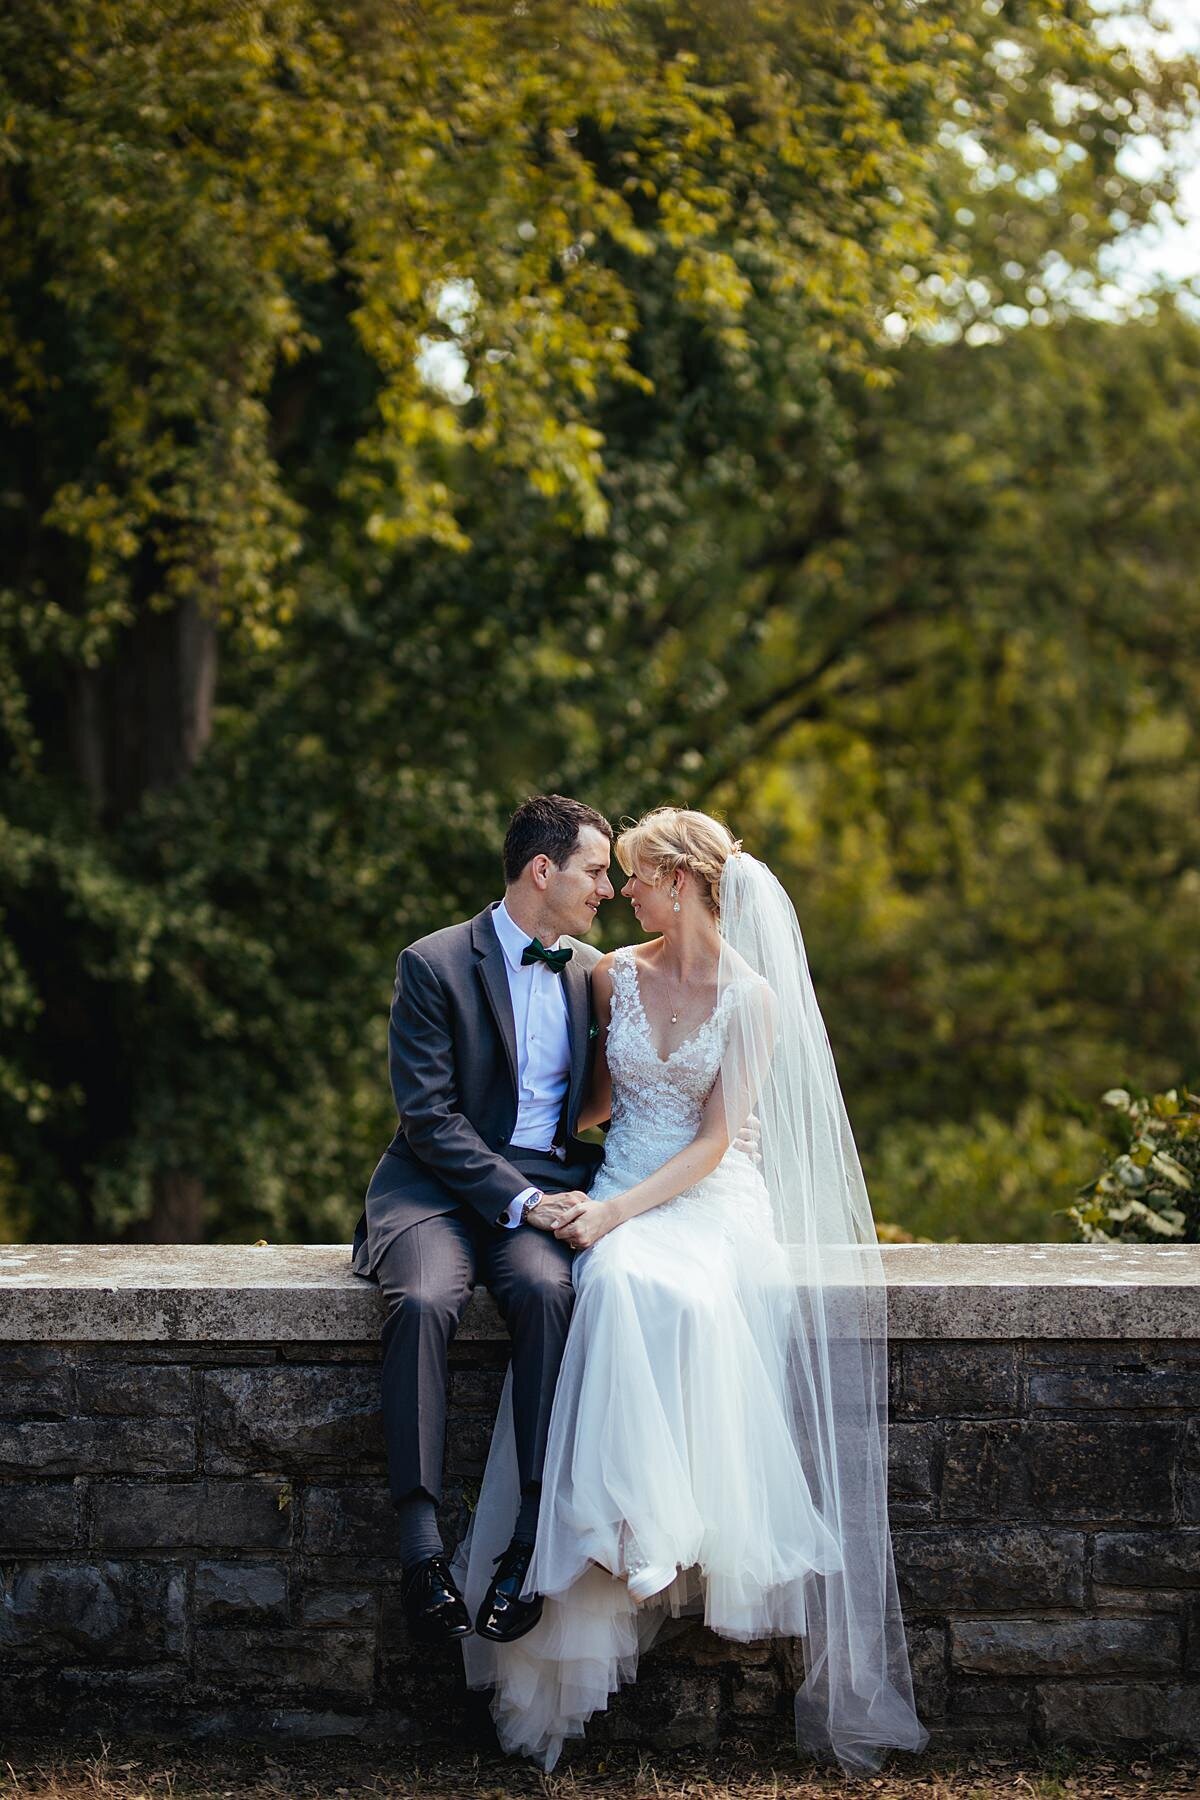 The bride, dressed in a sleeveless lace wedding dress and long veil sits beside the groom in a charcoal gray suit on a low stone wall at Cheekwood holding hands and touching foreheads